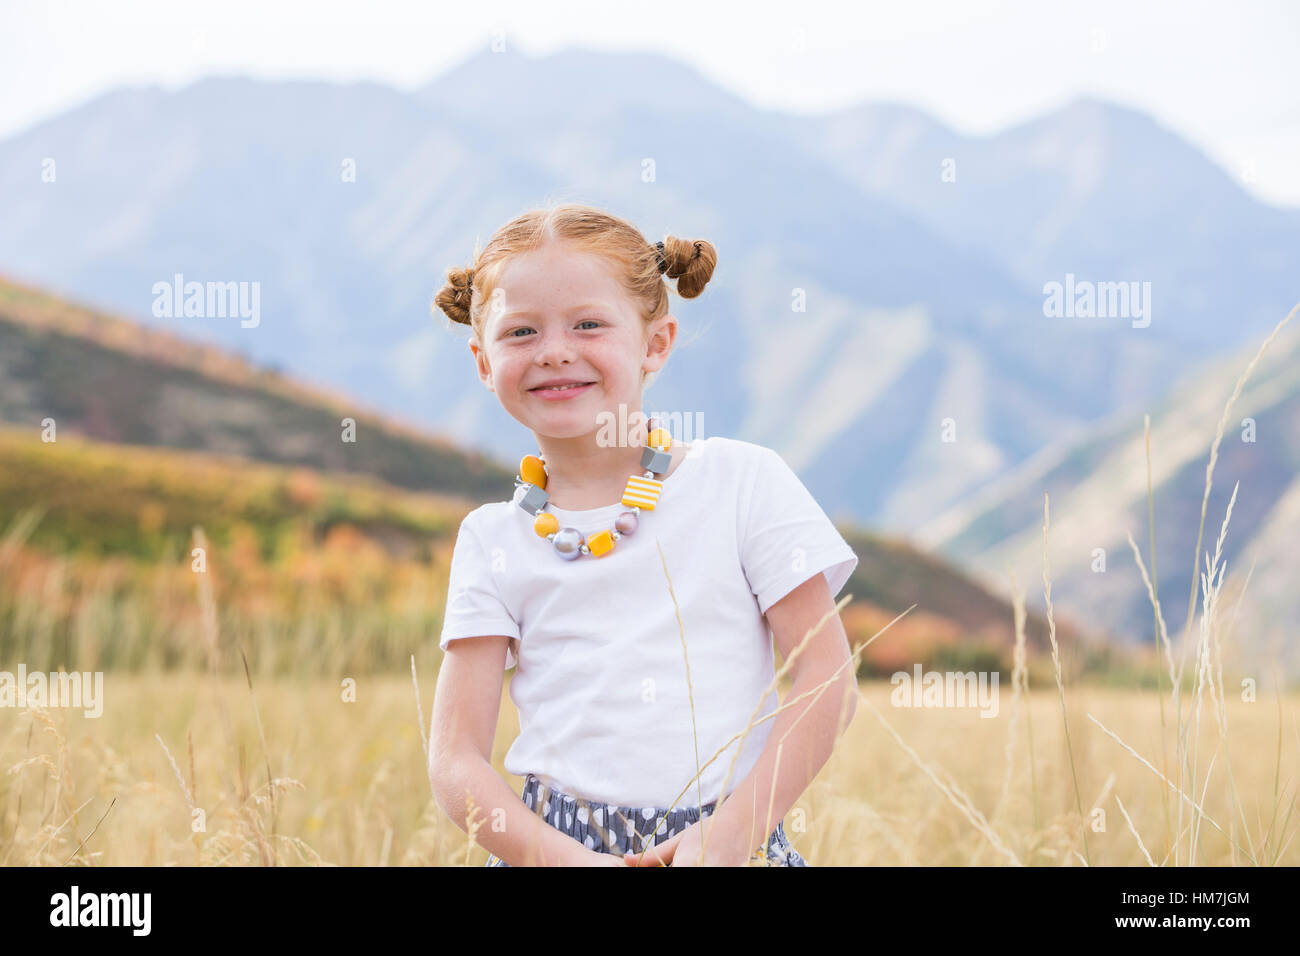 USA, Utah, Provo, Girl (4-5) standing in field Banque D'Images